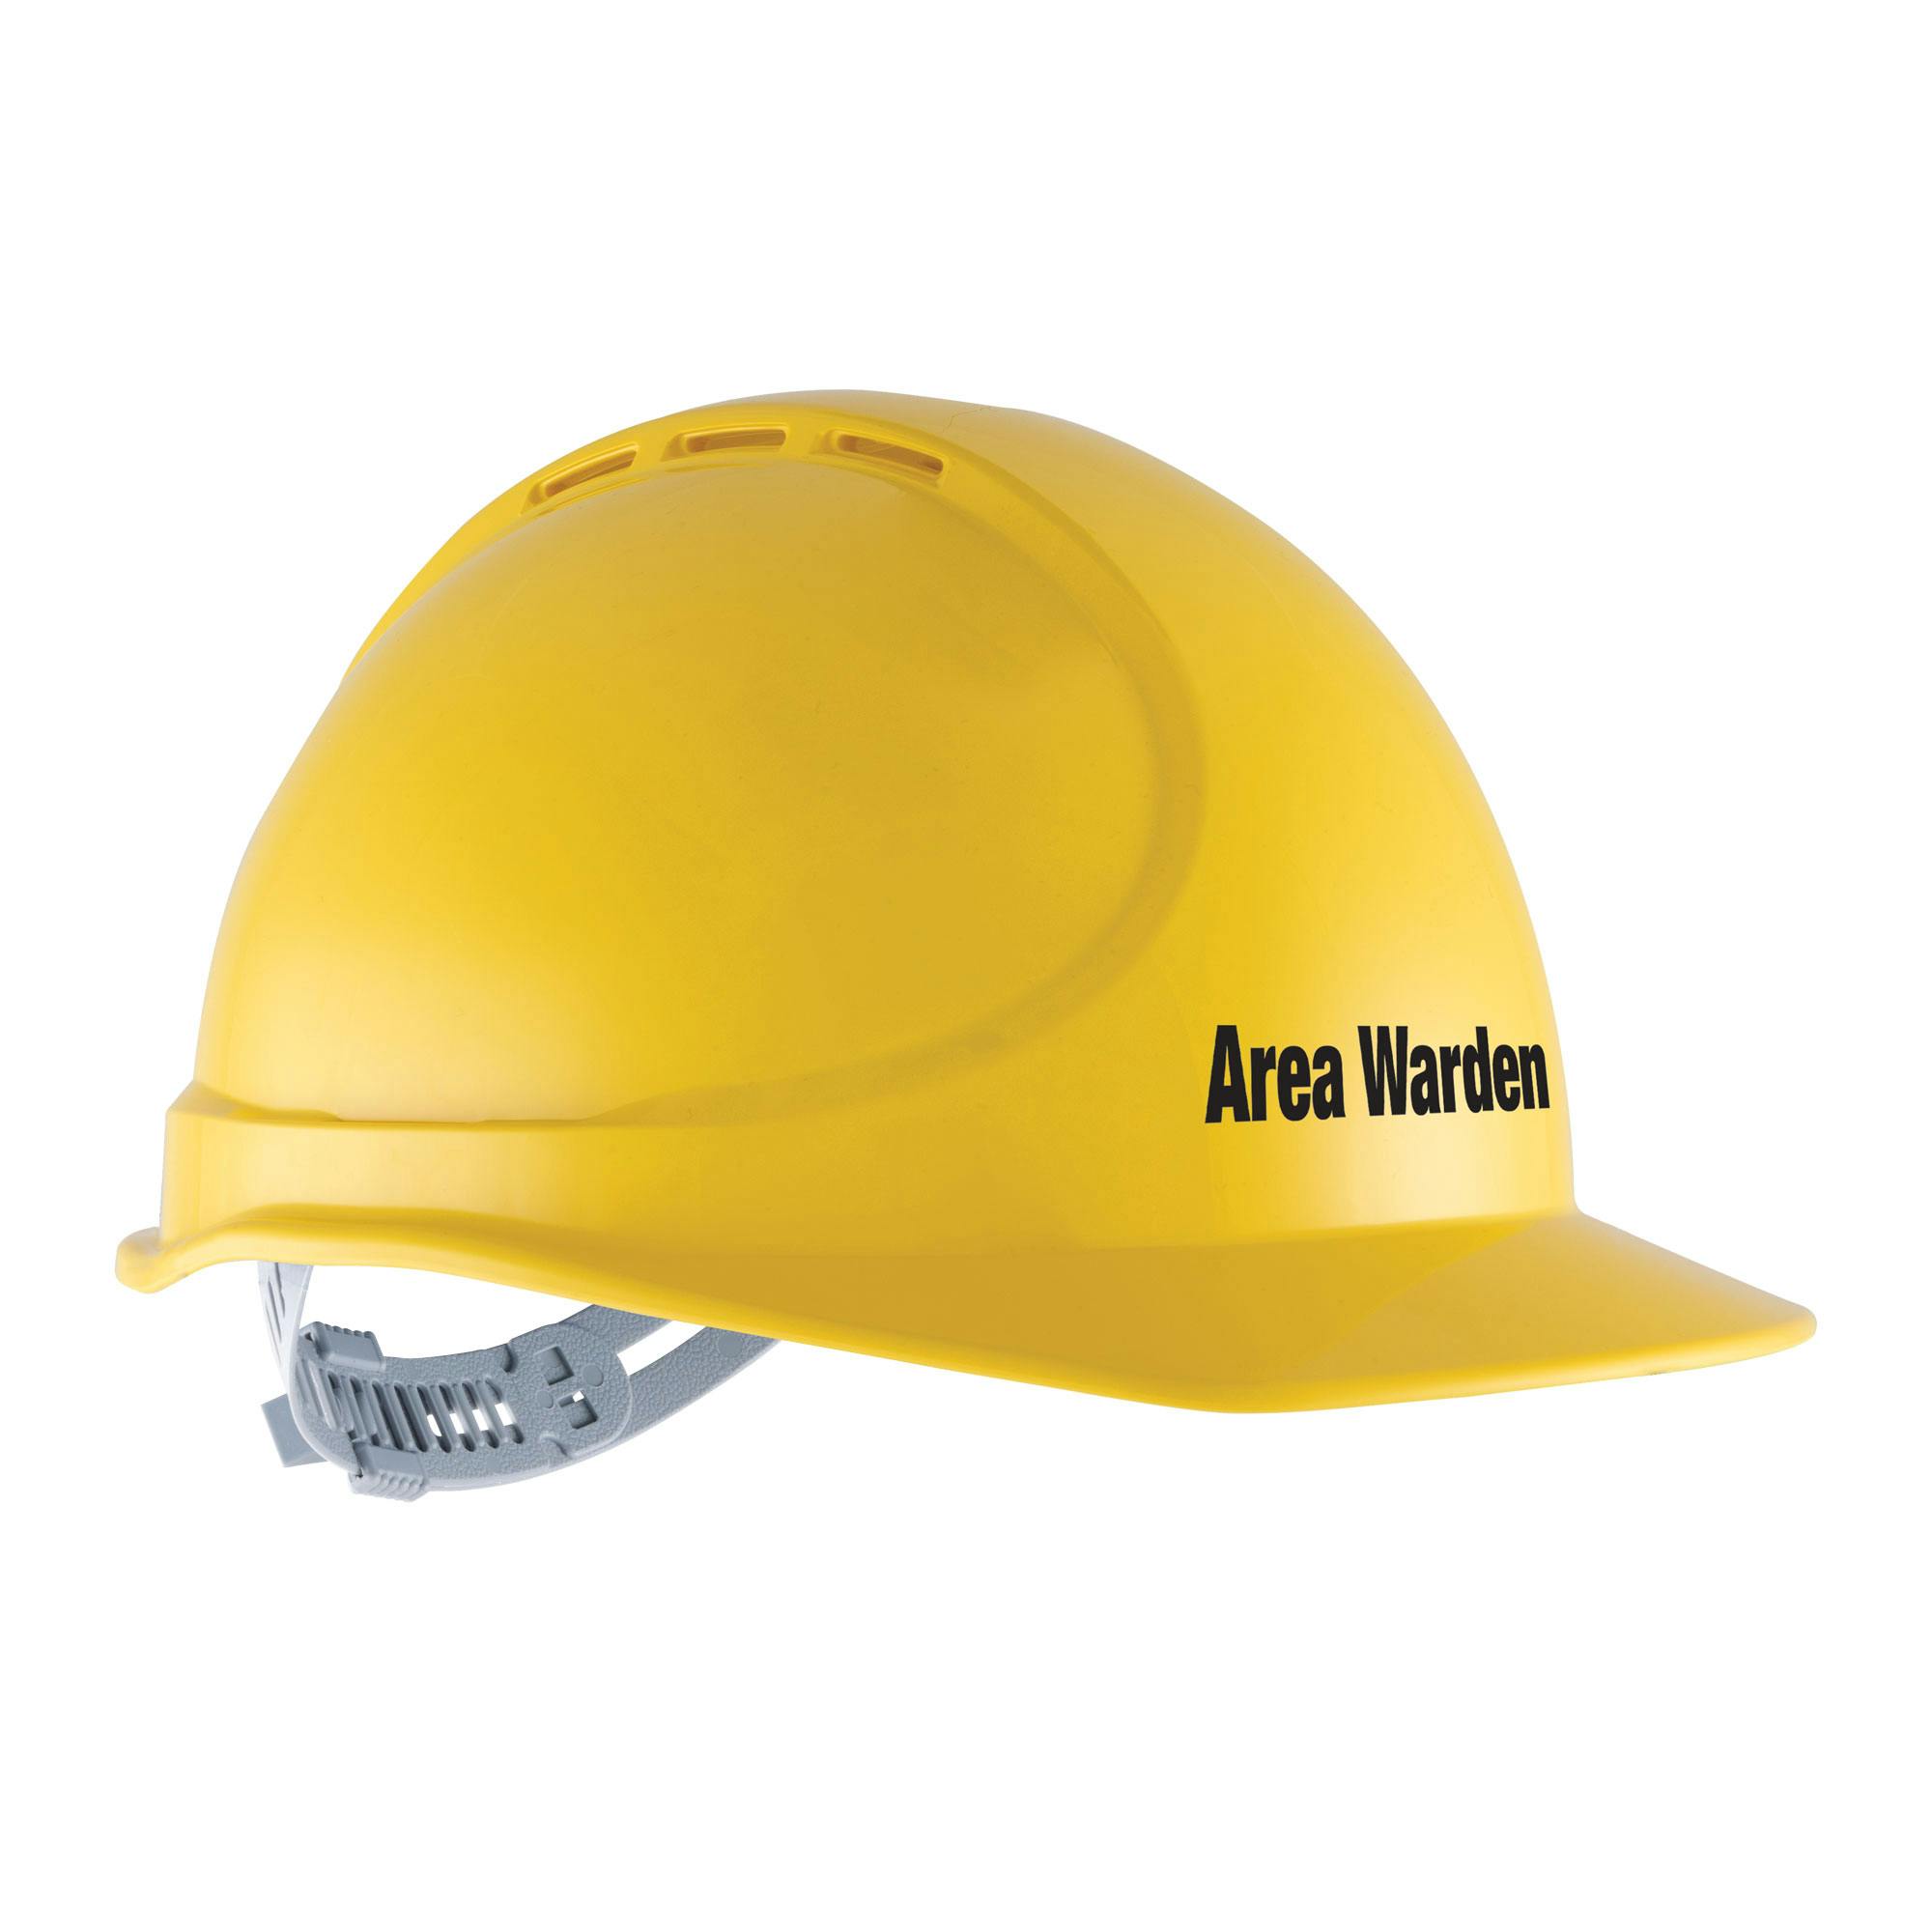 Force360 GTE3 ABS Vented Hard Hat With Slide Lock Harness, Type1_0